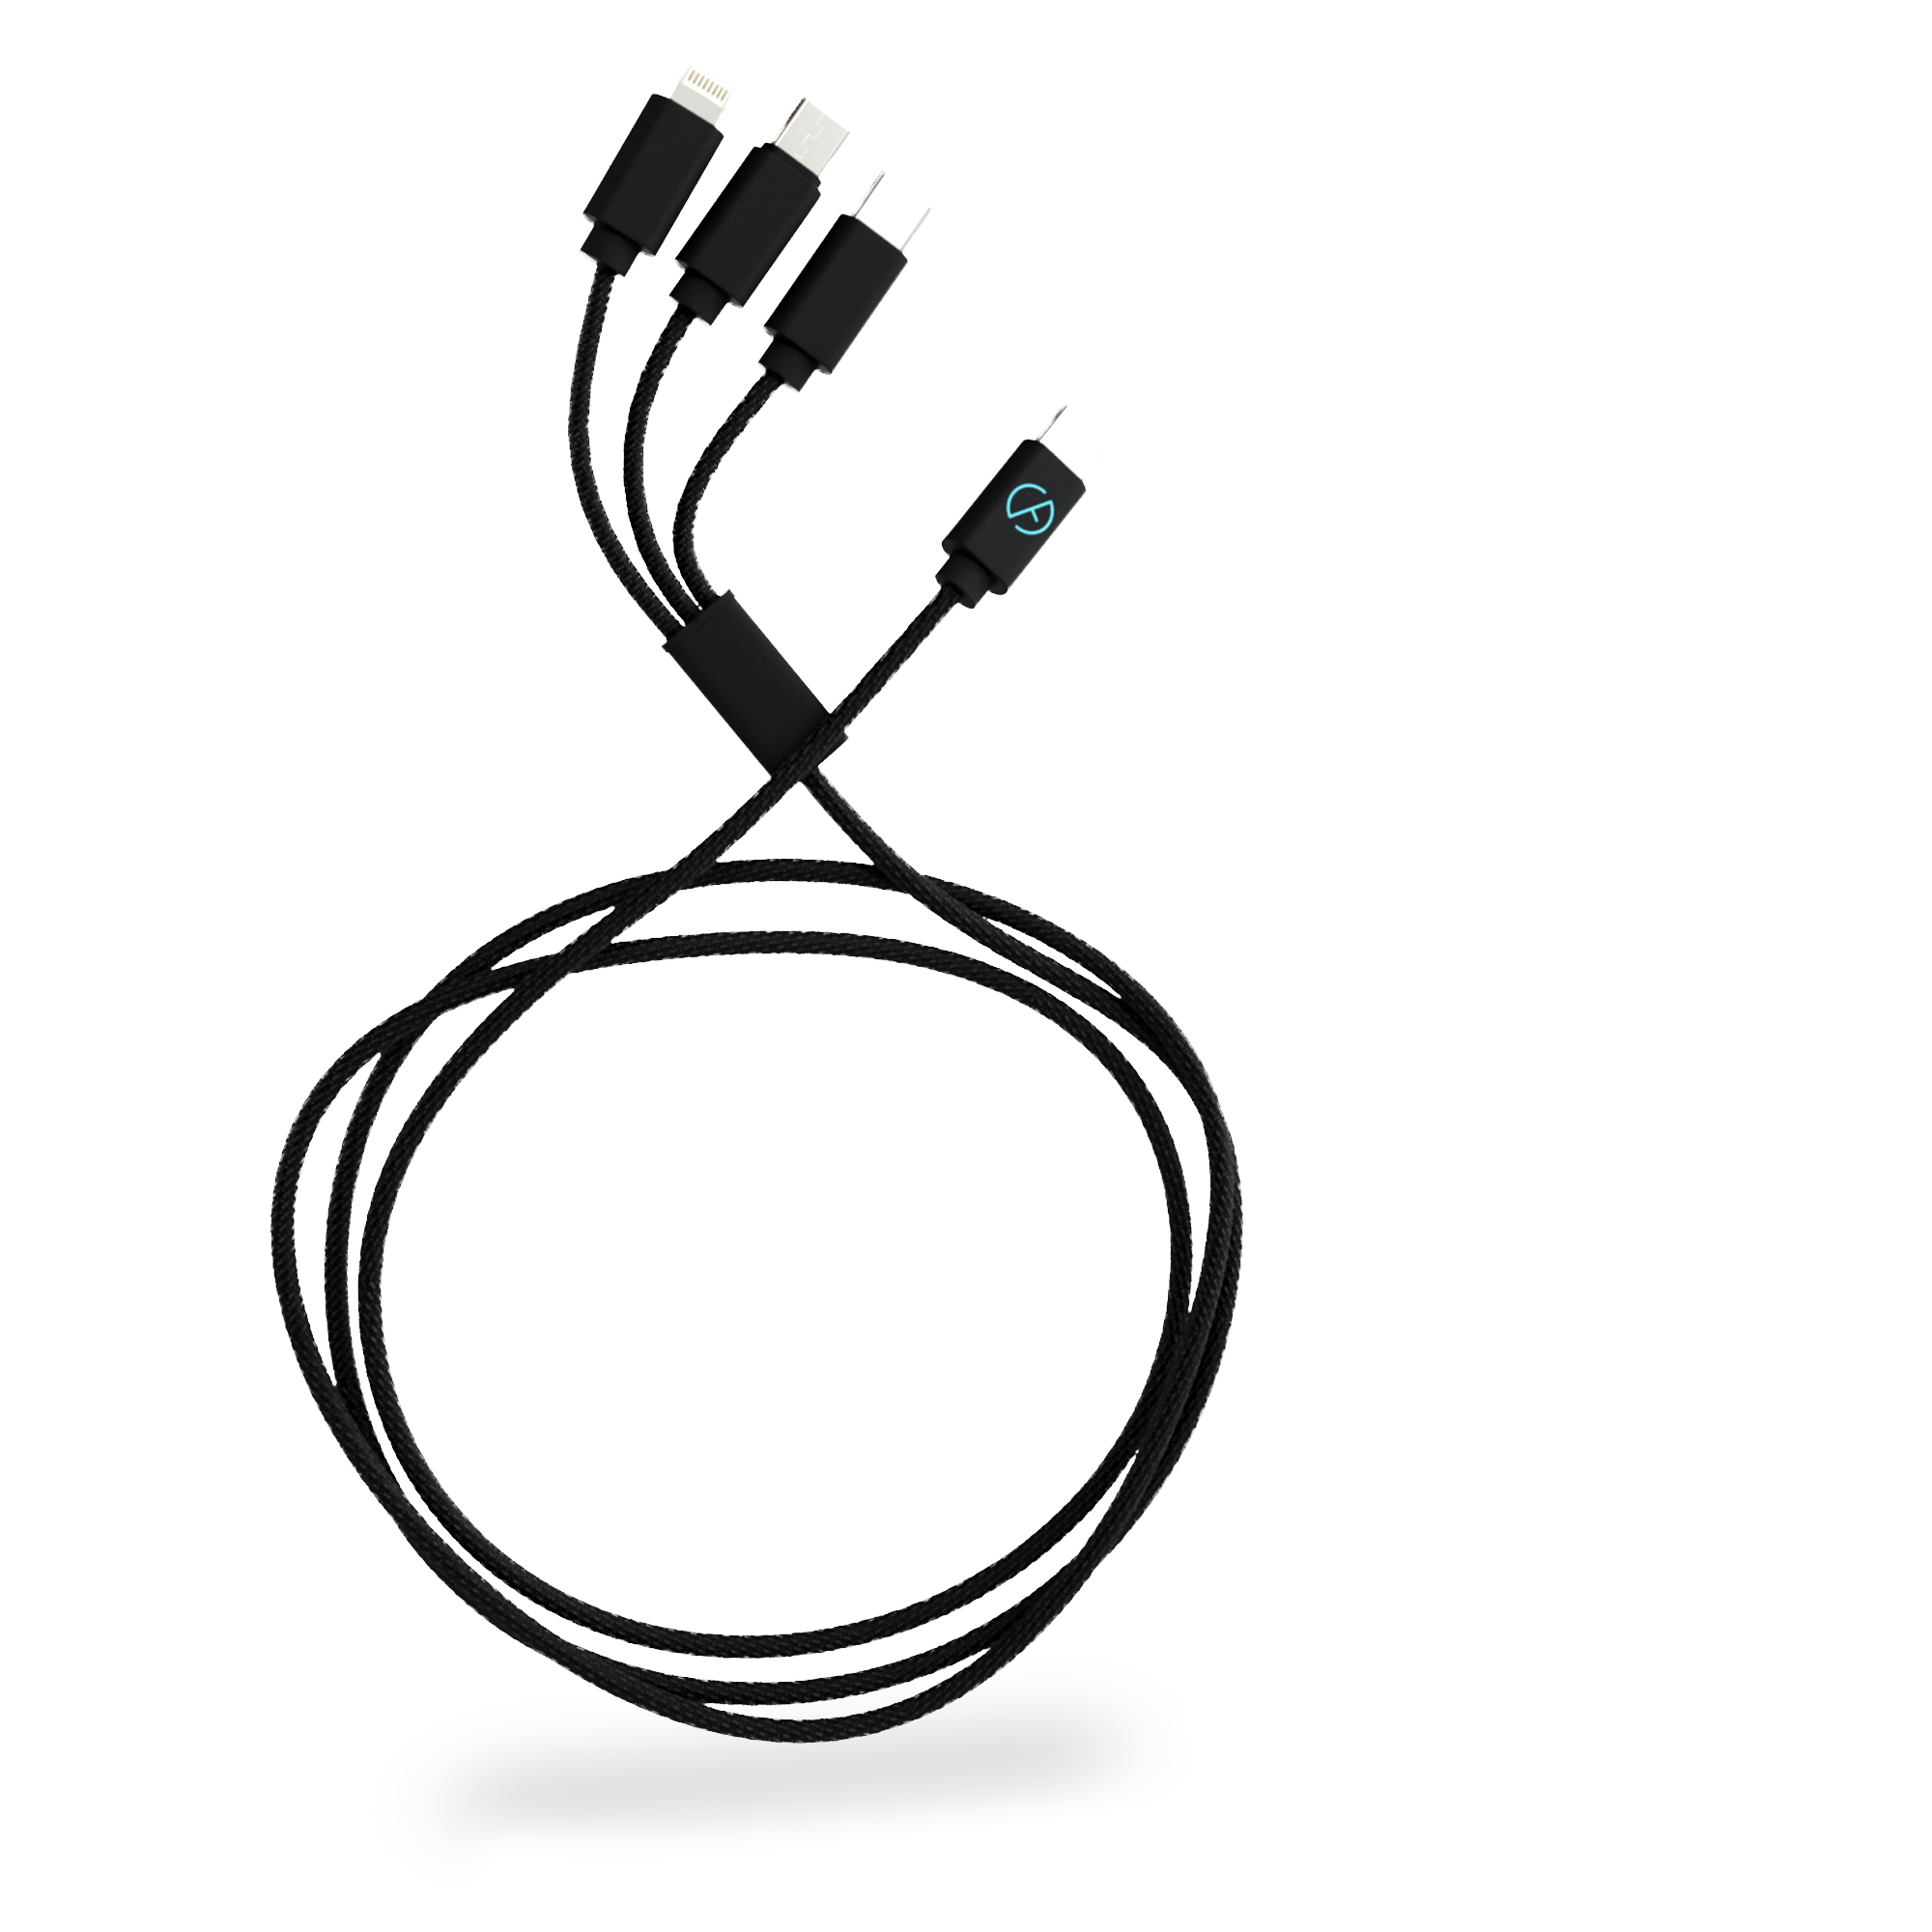 JuiceBack: Data Blocking Charging Cable 3 in 1 | USB-A to Lightning, USB-C & Micro USB